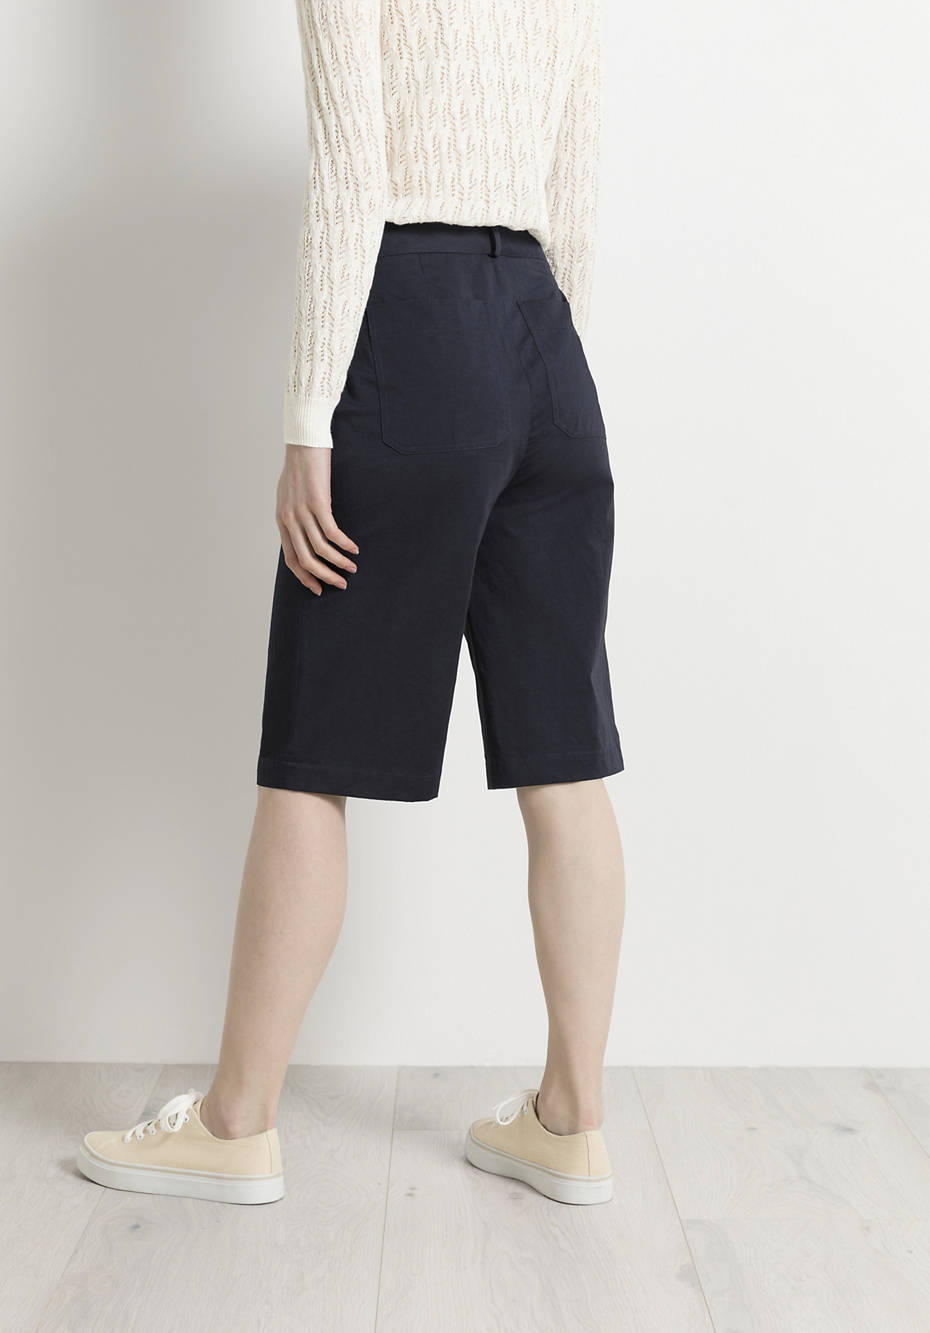 Bermuda shorts made of organic cotton with linen